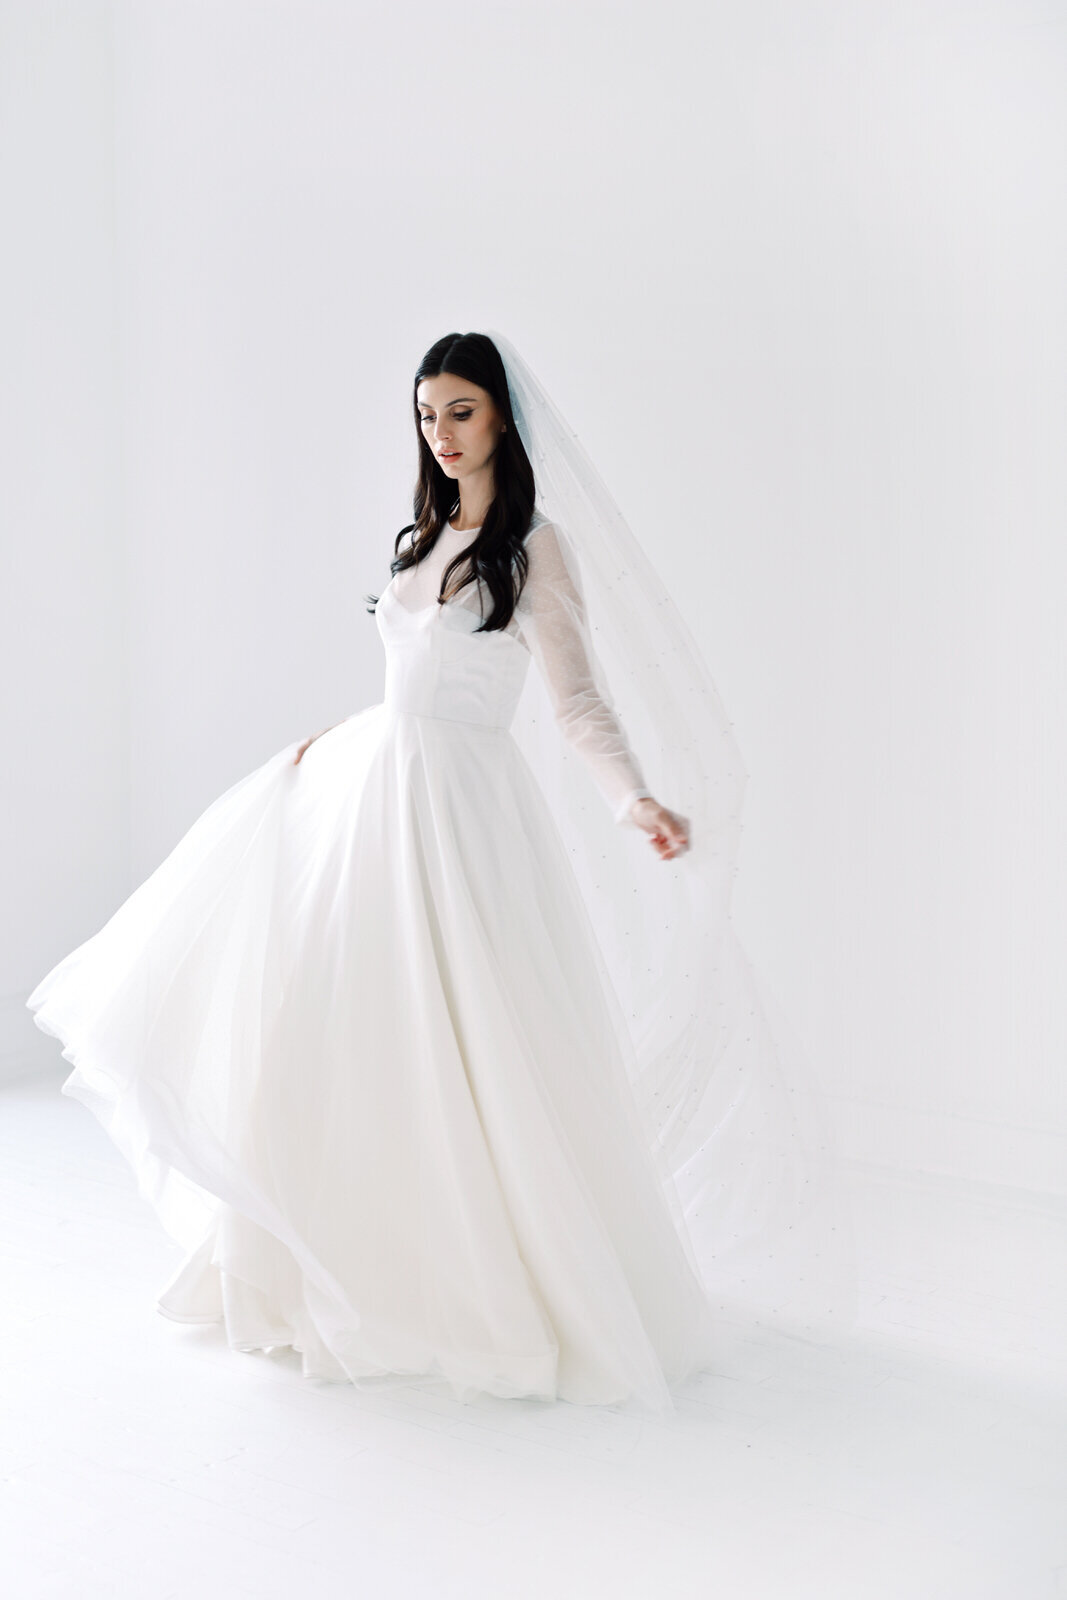 Stylish Bridal Editorial Photography for a New York City Brand 12